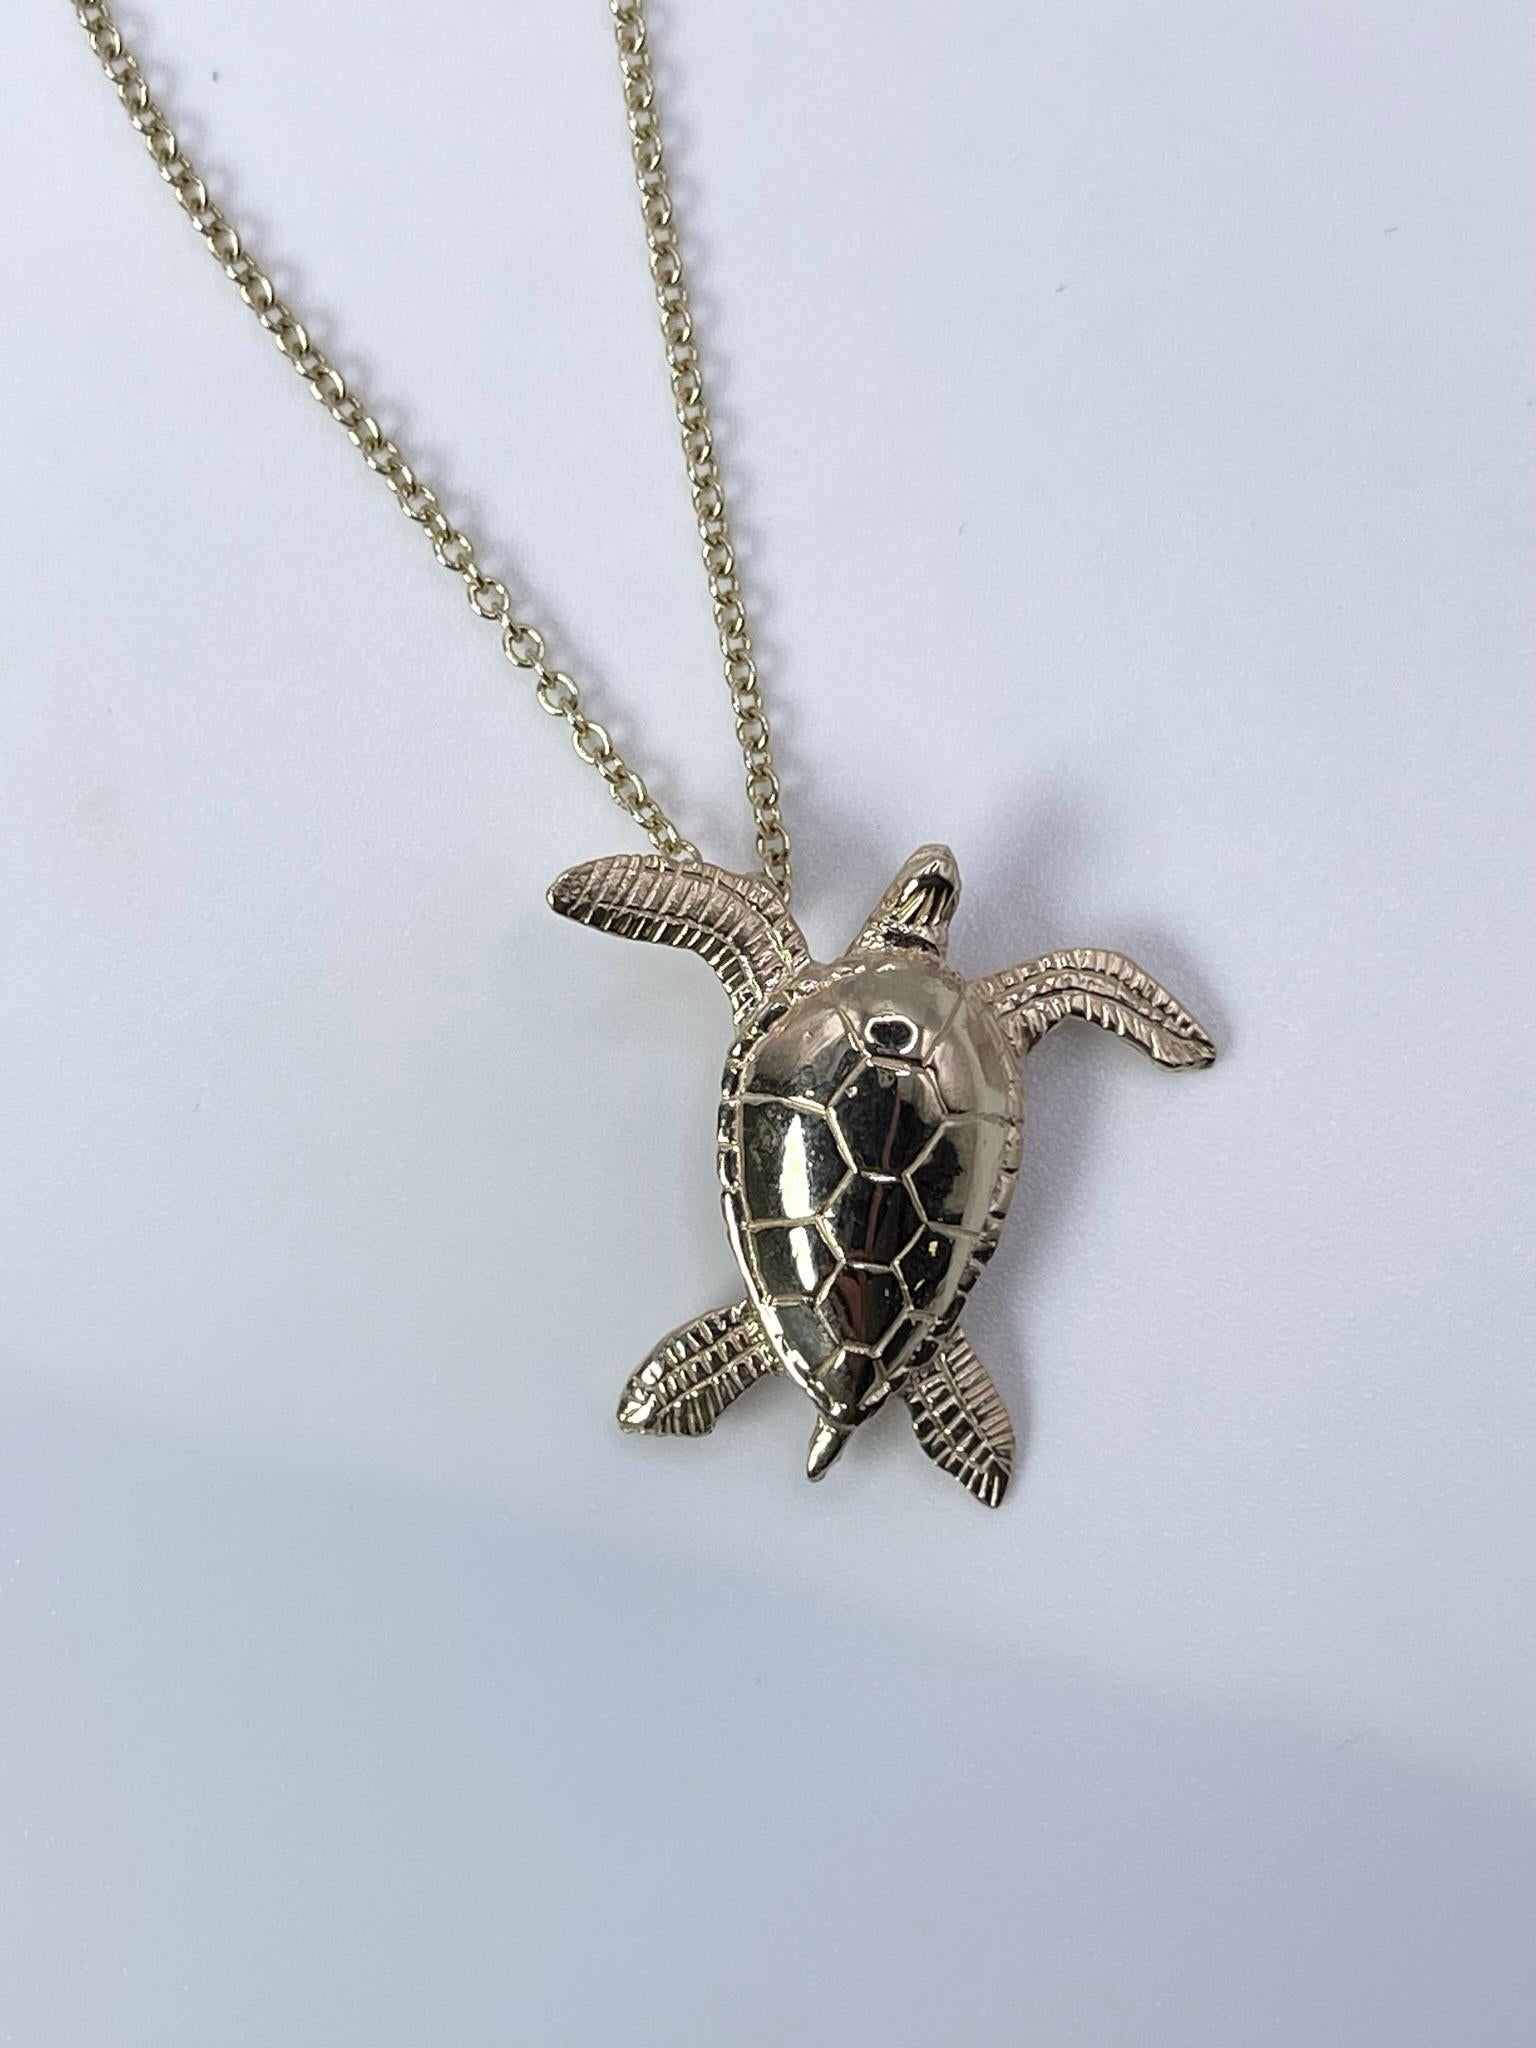 Elegant sea turtle pendant in 14KT yellow gold. The pendant comes with a chain, certificate and box. Ready to ship!

GRAM WEIGHT: 2.85gr
GOLD: 14KT yellow gold
WIDTH: 19mm
LENGTH: 18mm


WHAT YOU GET AT STAMPAR JEWELERS:
Stampar Jewelers, located in